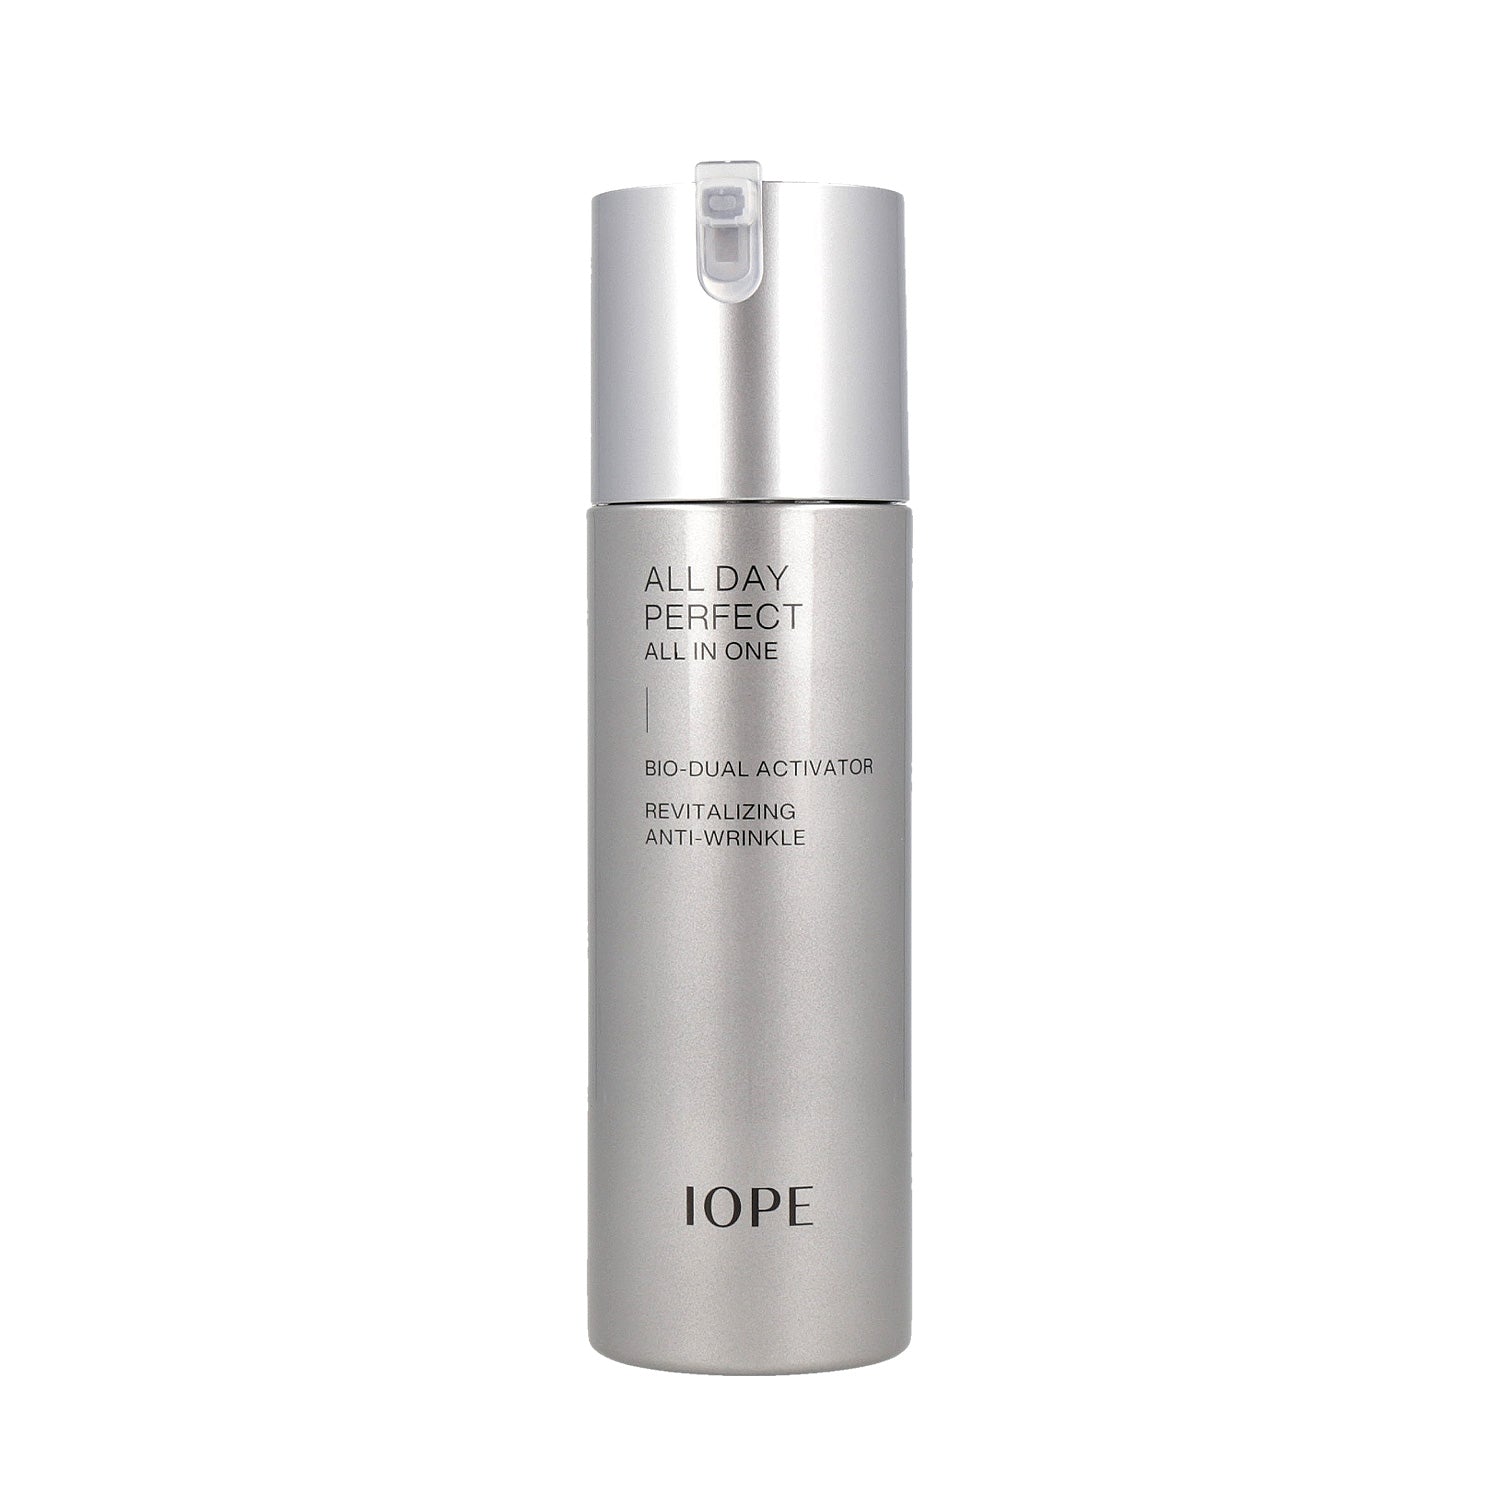 IOPE Men All Day Perfect All In One 120ml serum bottle with blue label and pump dispenser.